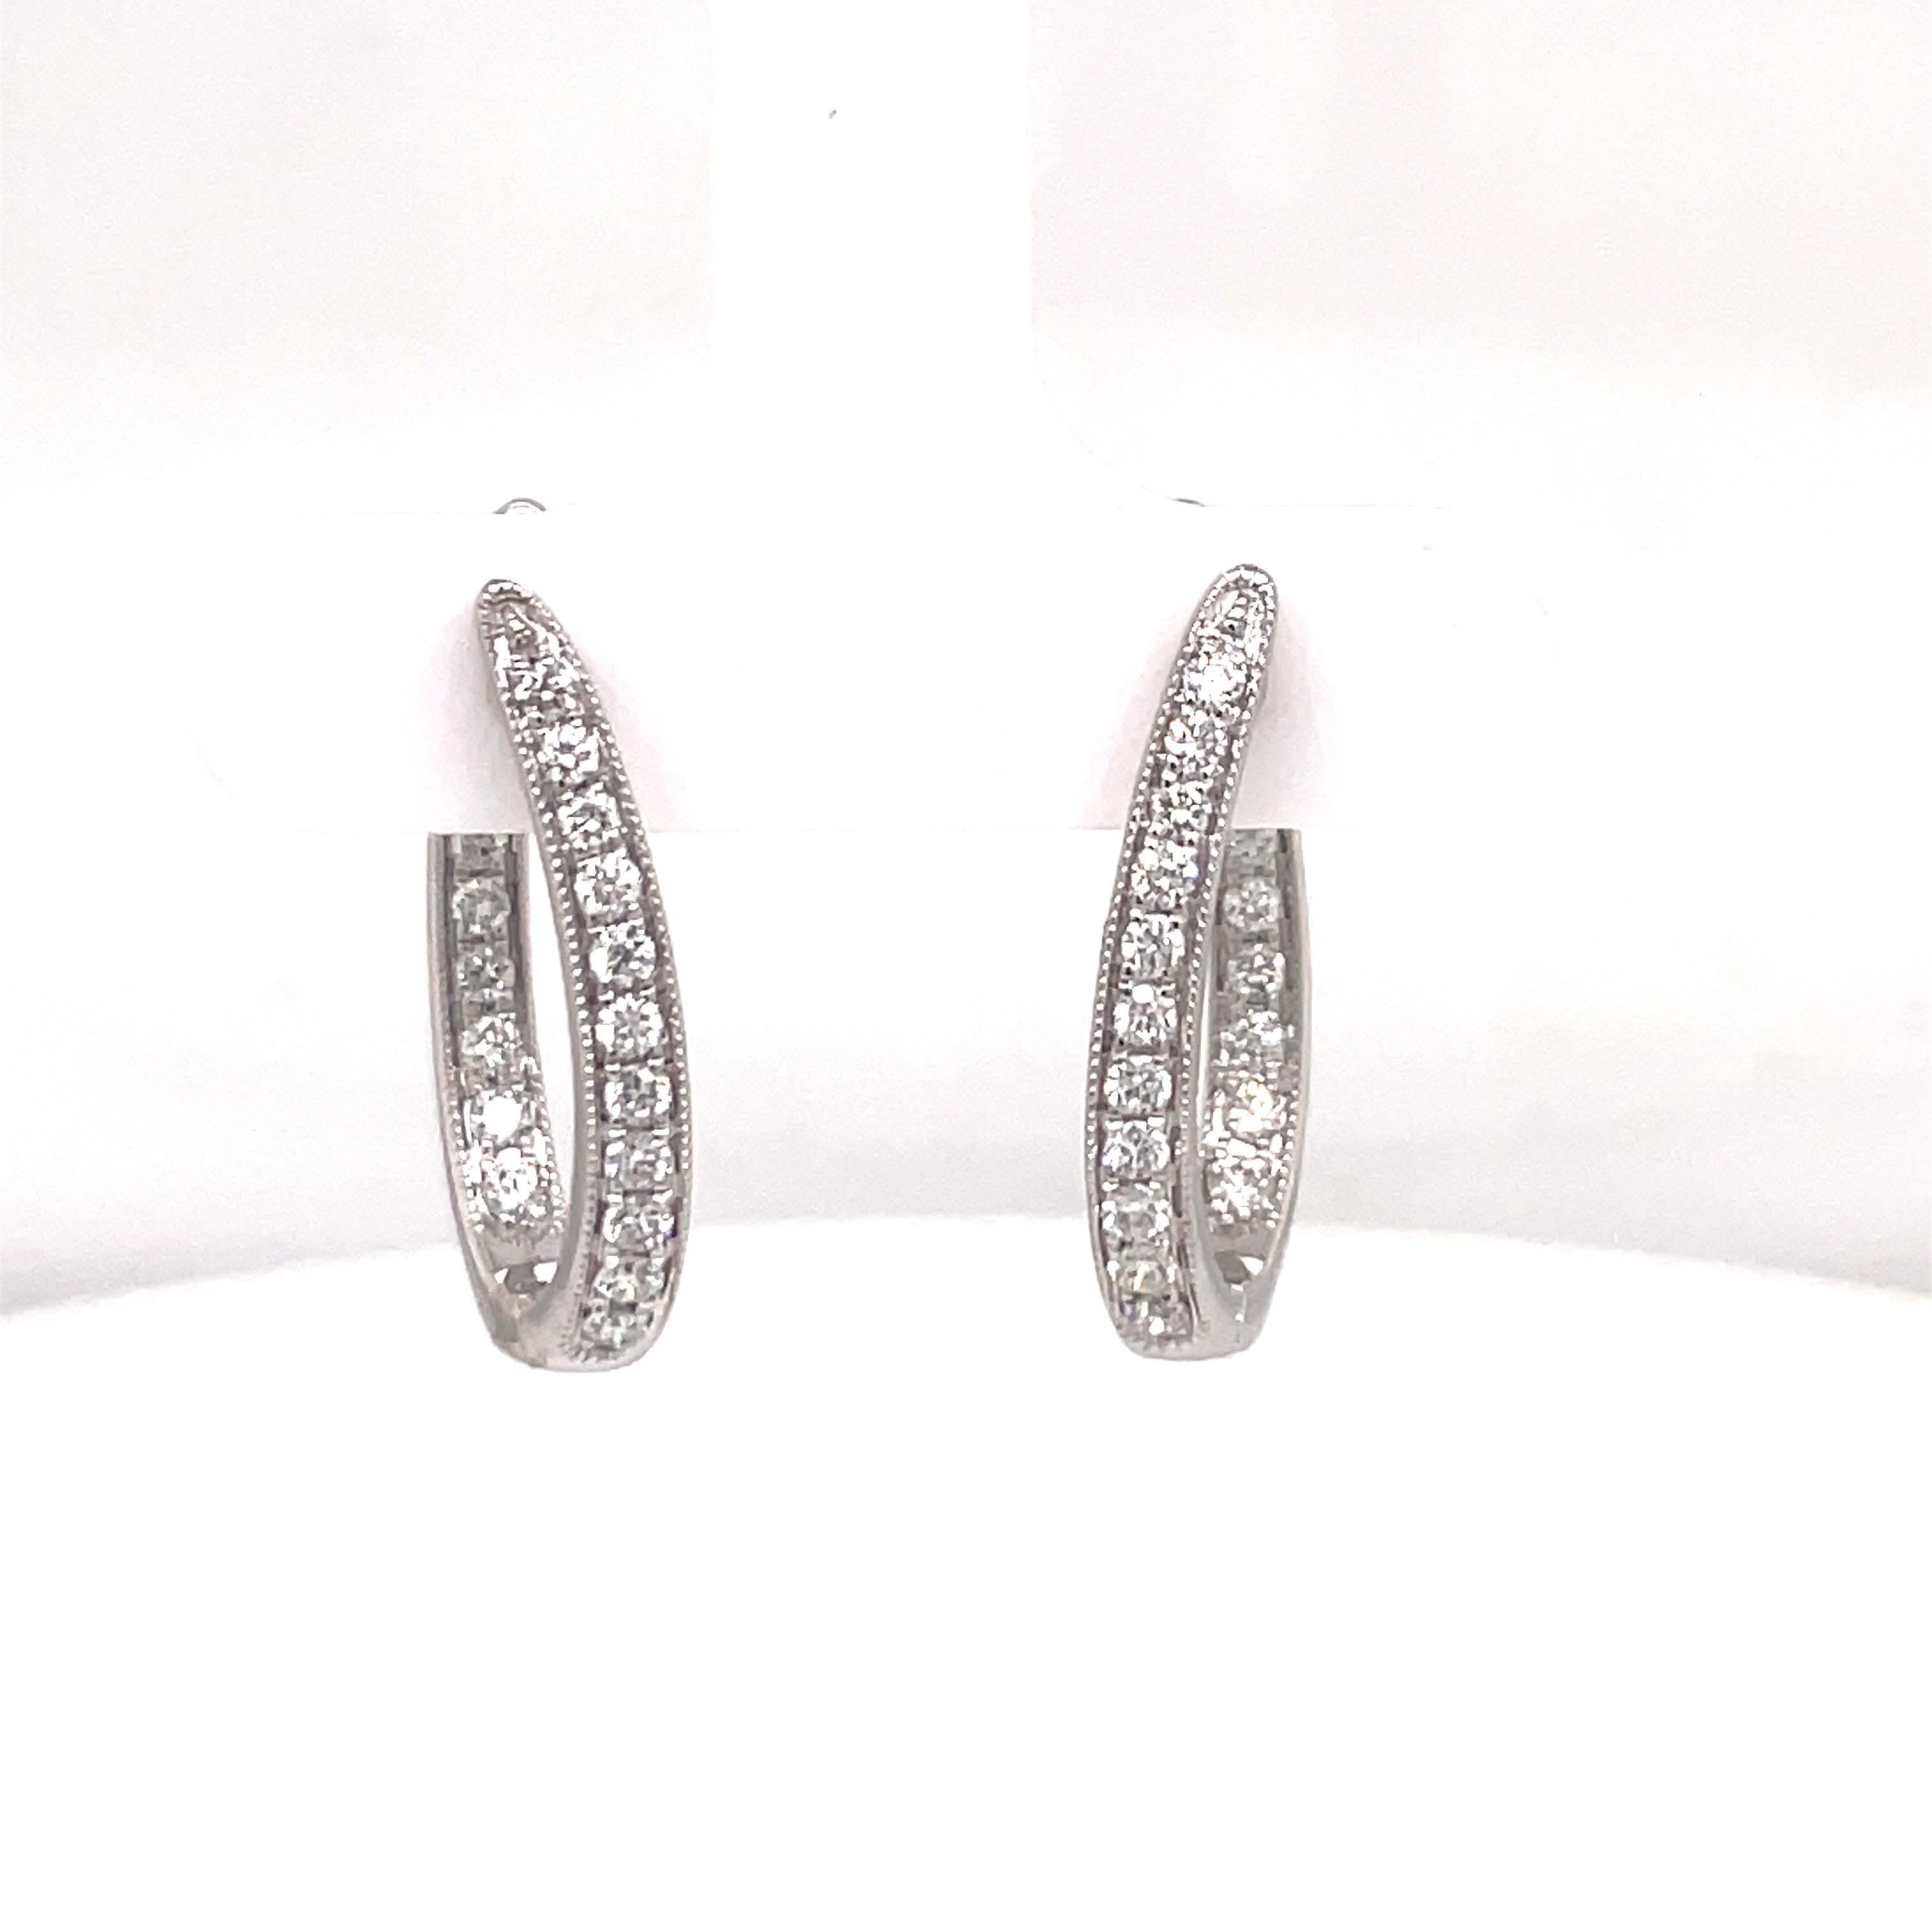 Contemporary In and Out Diamond Hoop Earrings 0.65 Carats 14 Karat White Gold 3.5 Grams For Sale